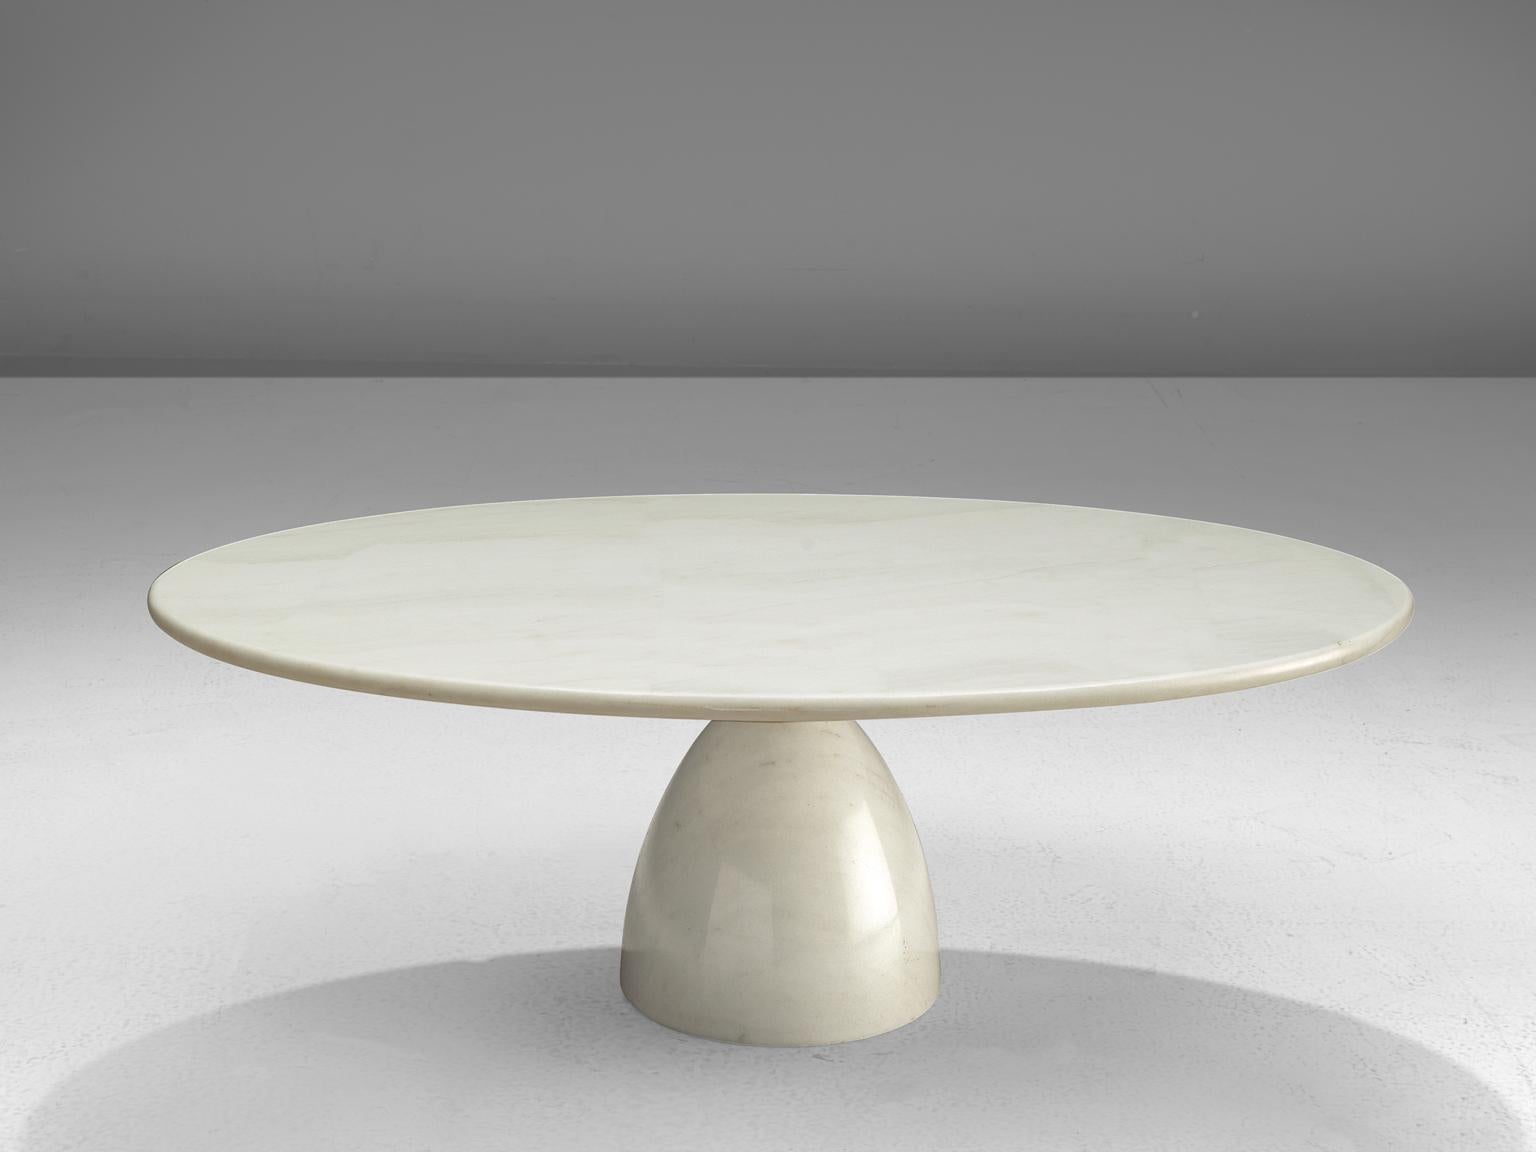 Peter Draenert, coffee table, marble, Germany, circa 1972

This strong cocktail table features a column foot and a thick oval tabletop. The aesthetics are archetypical for postmodern design, bearing references to architectural forms and without a